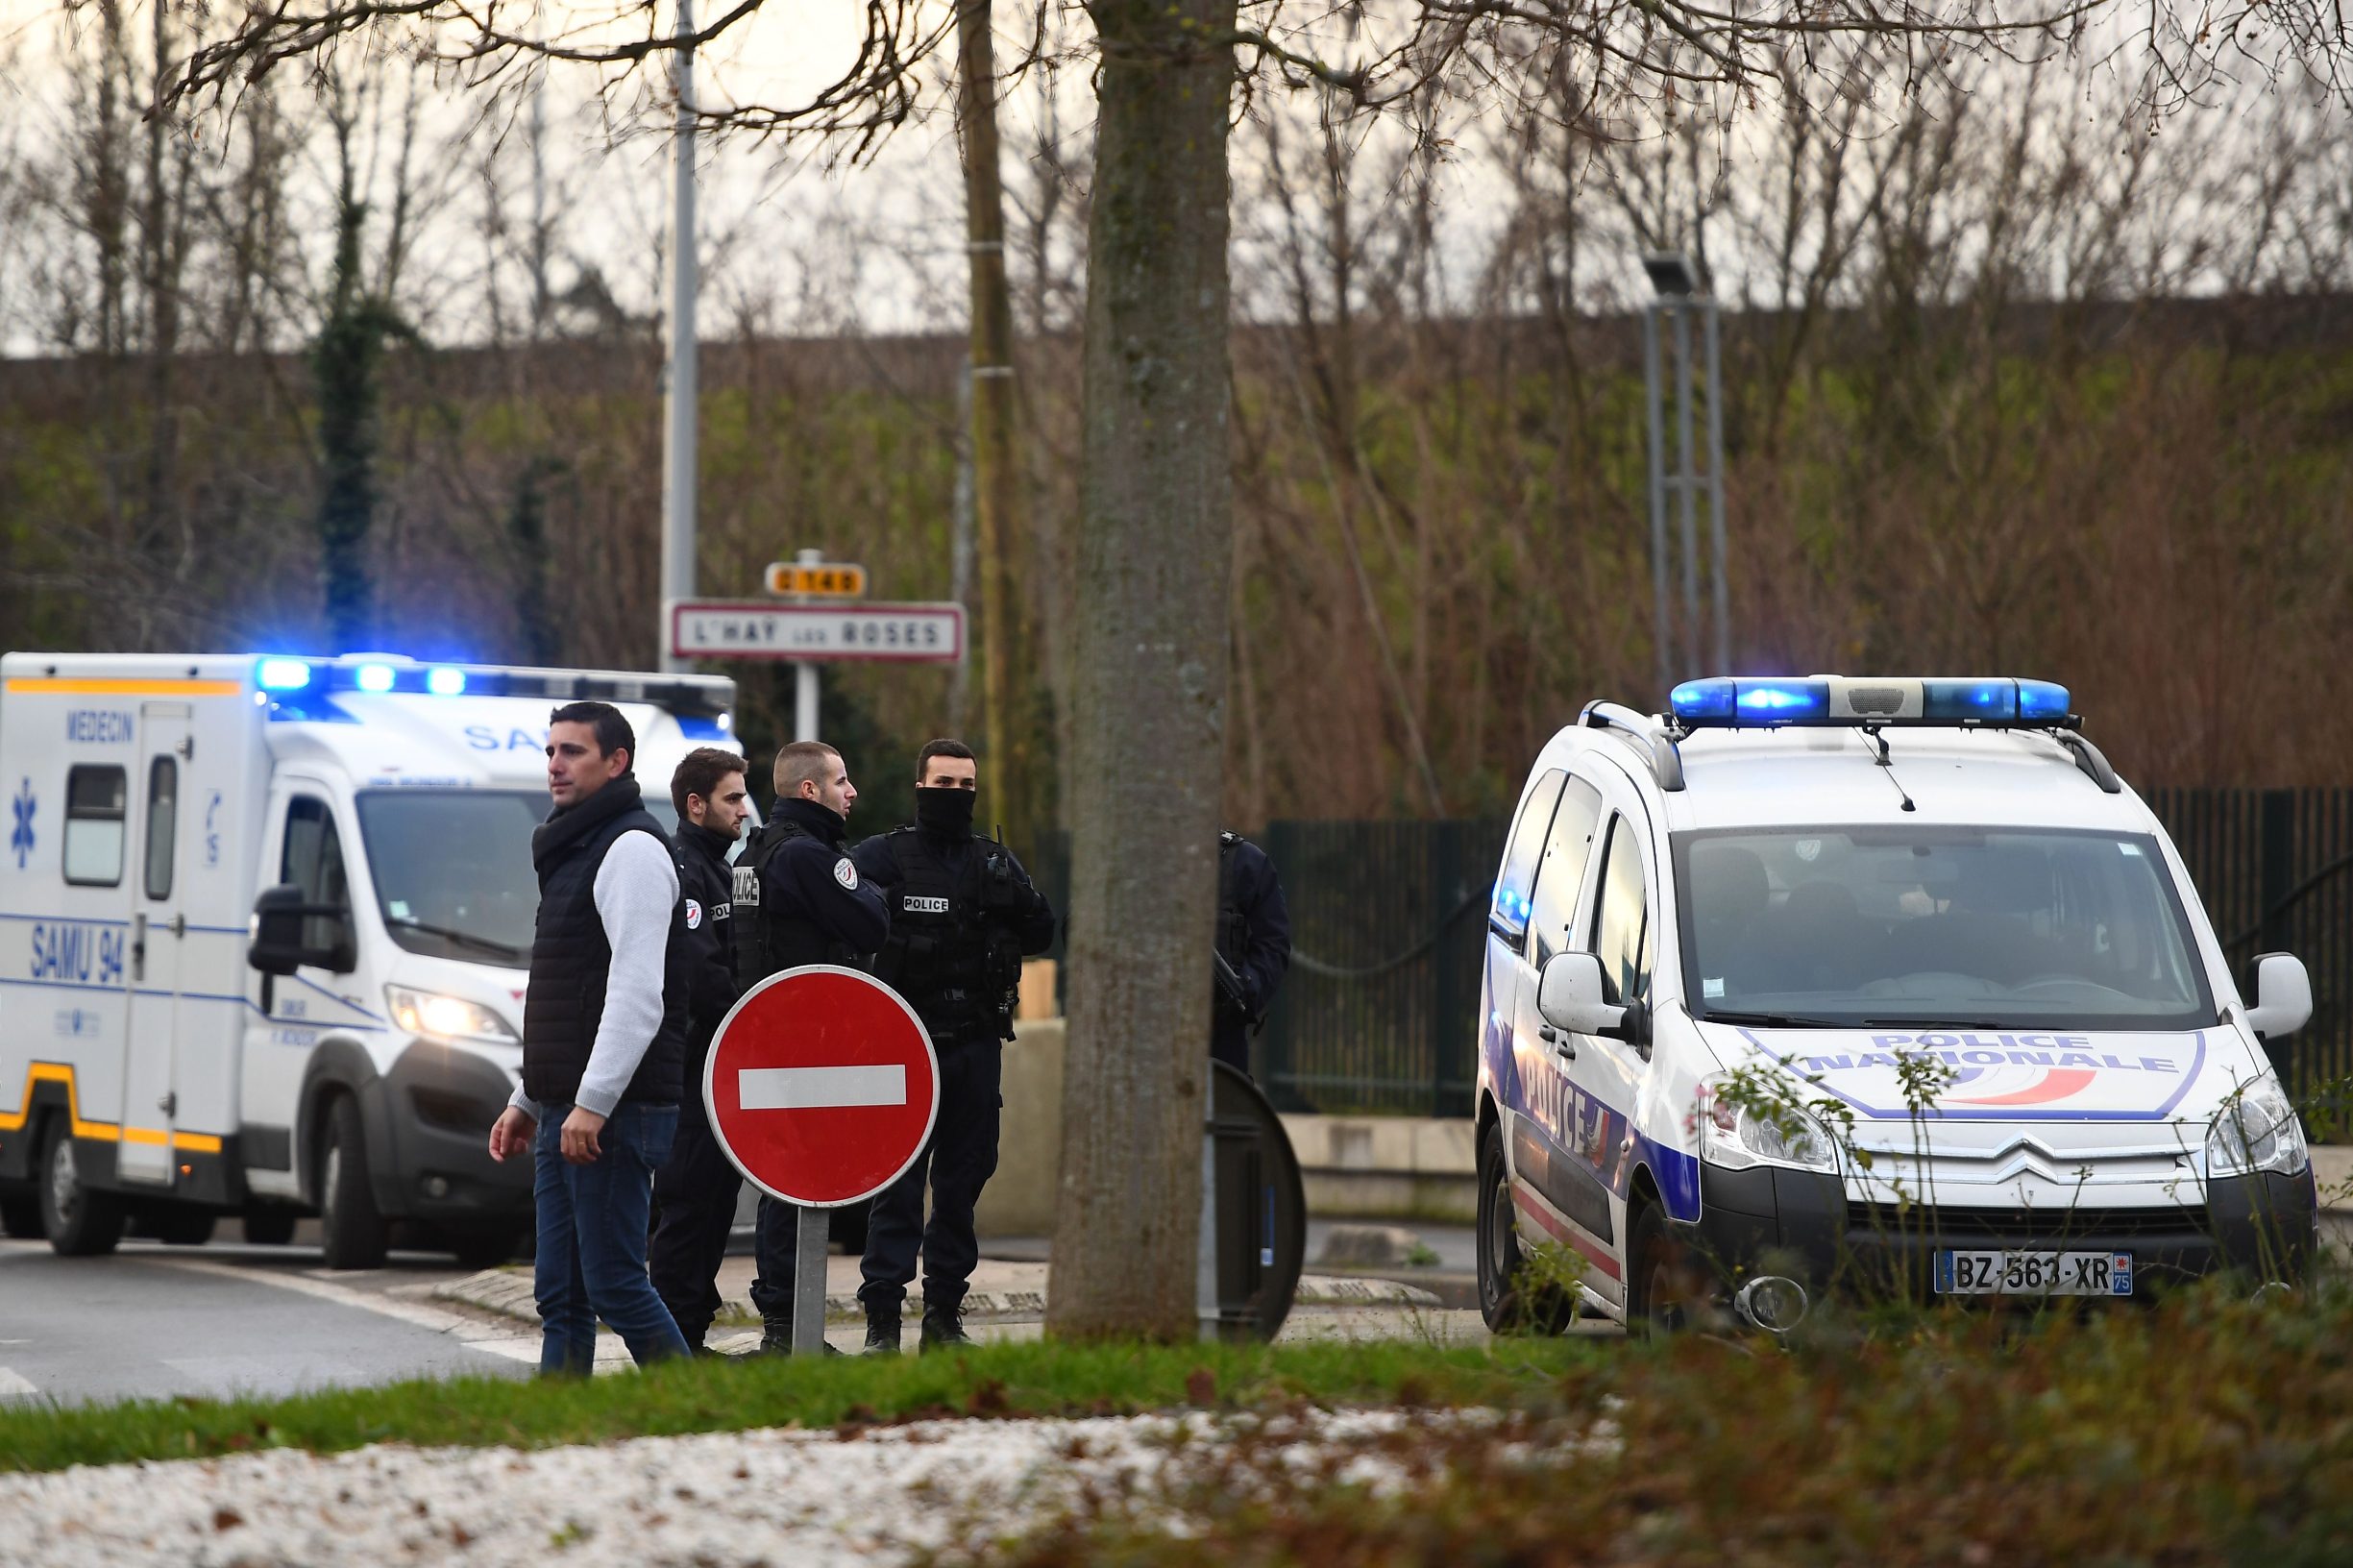 Police stand near a park in the south of Paris' suburban city of Villejuif on January 3, 2020 where police shot dead a knife-wielding man who killed one person and injured at least two others. - The man had attacked 